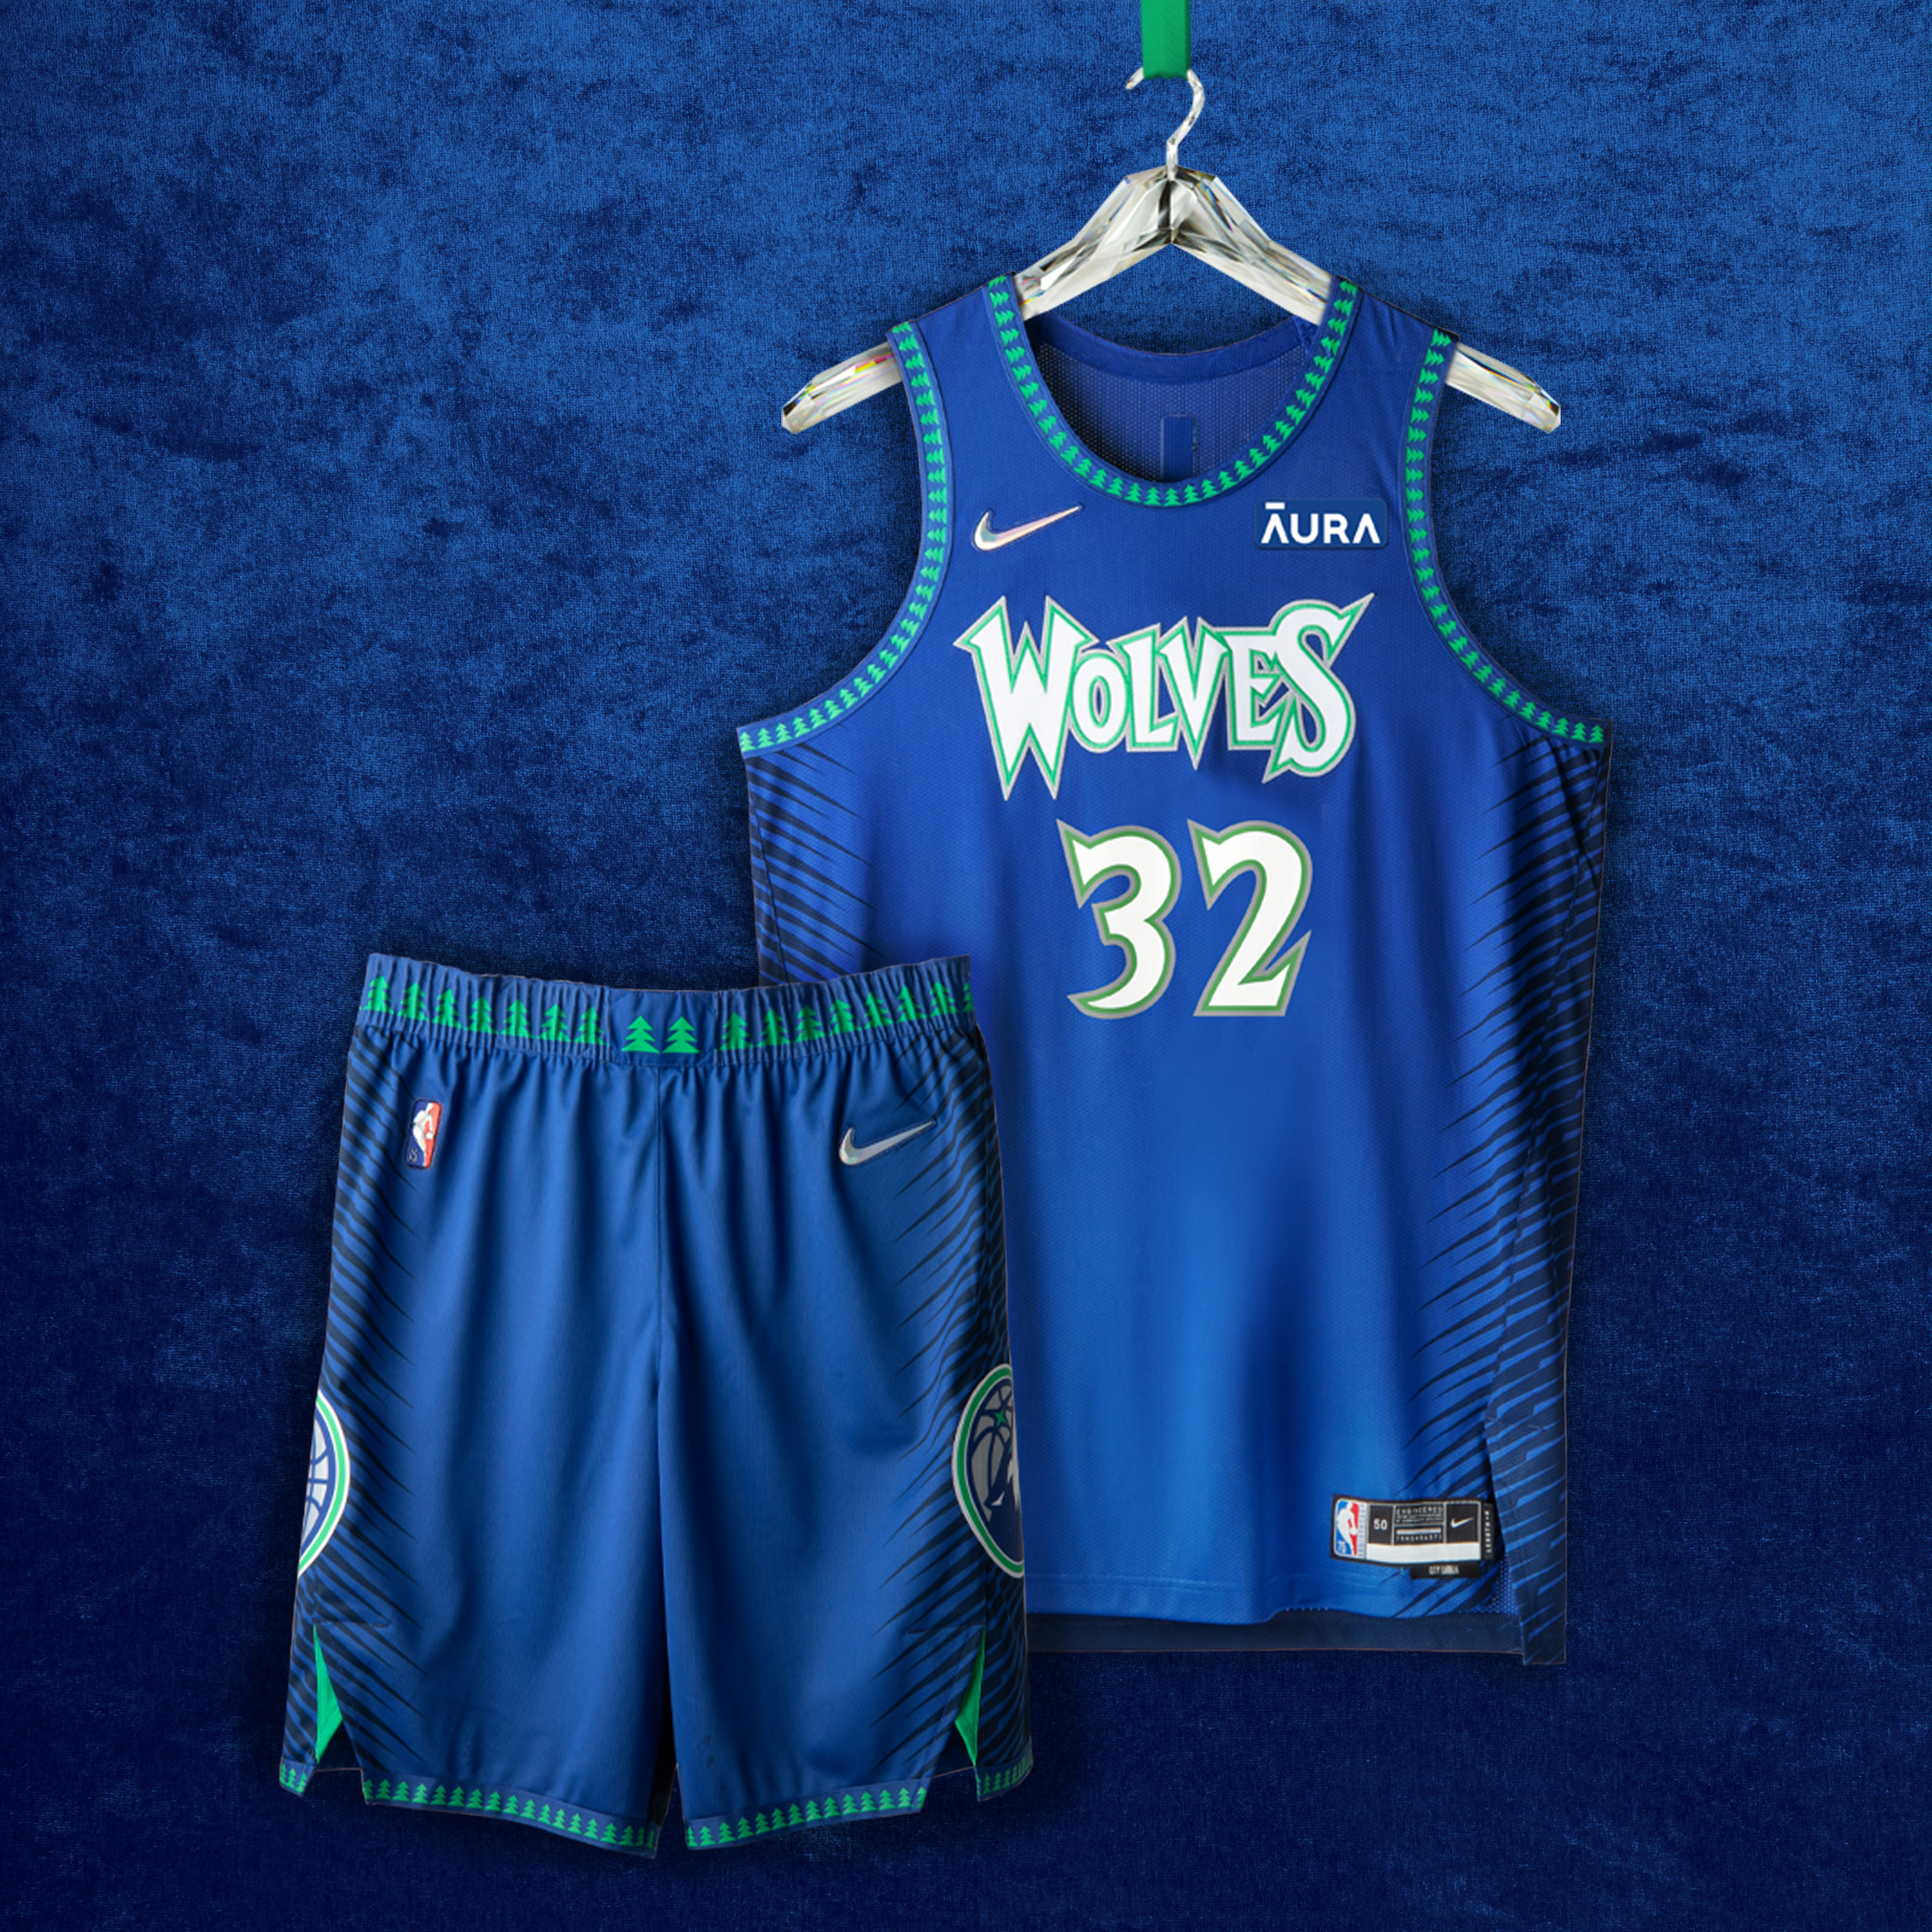 timber wolves jersey